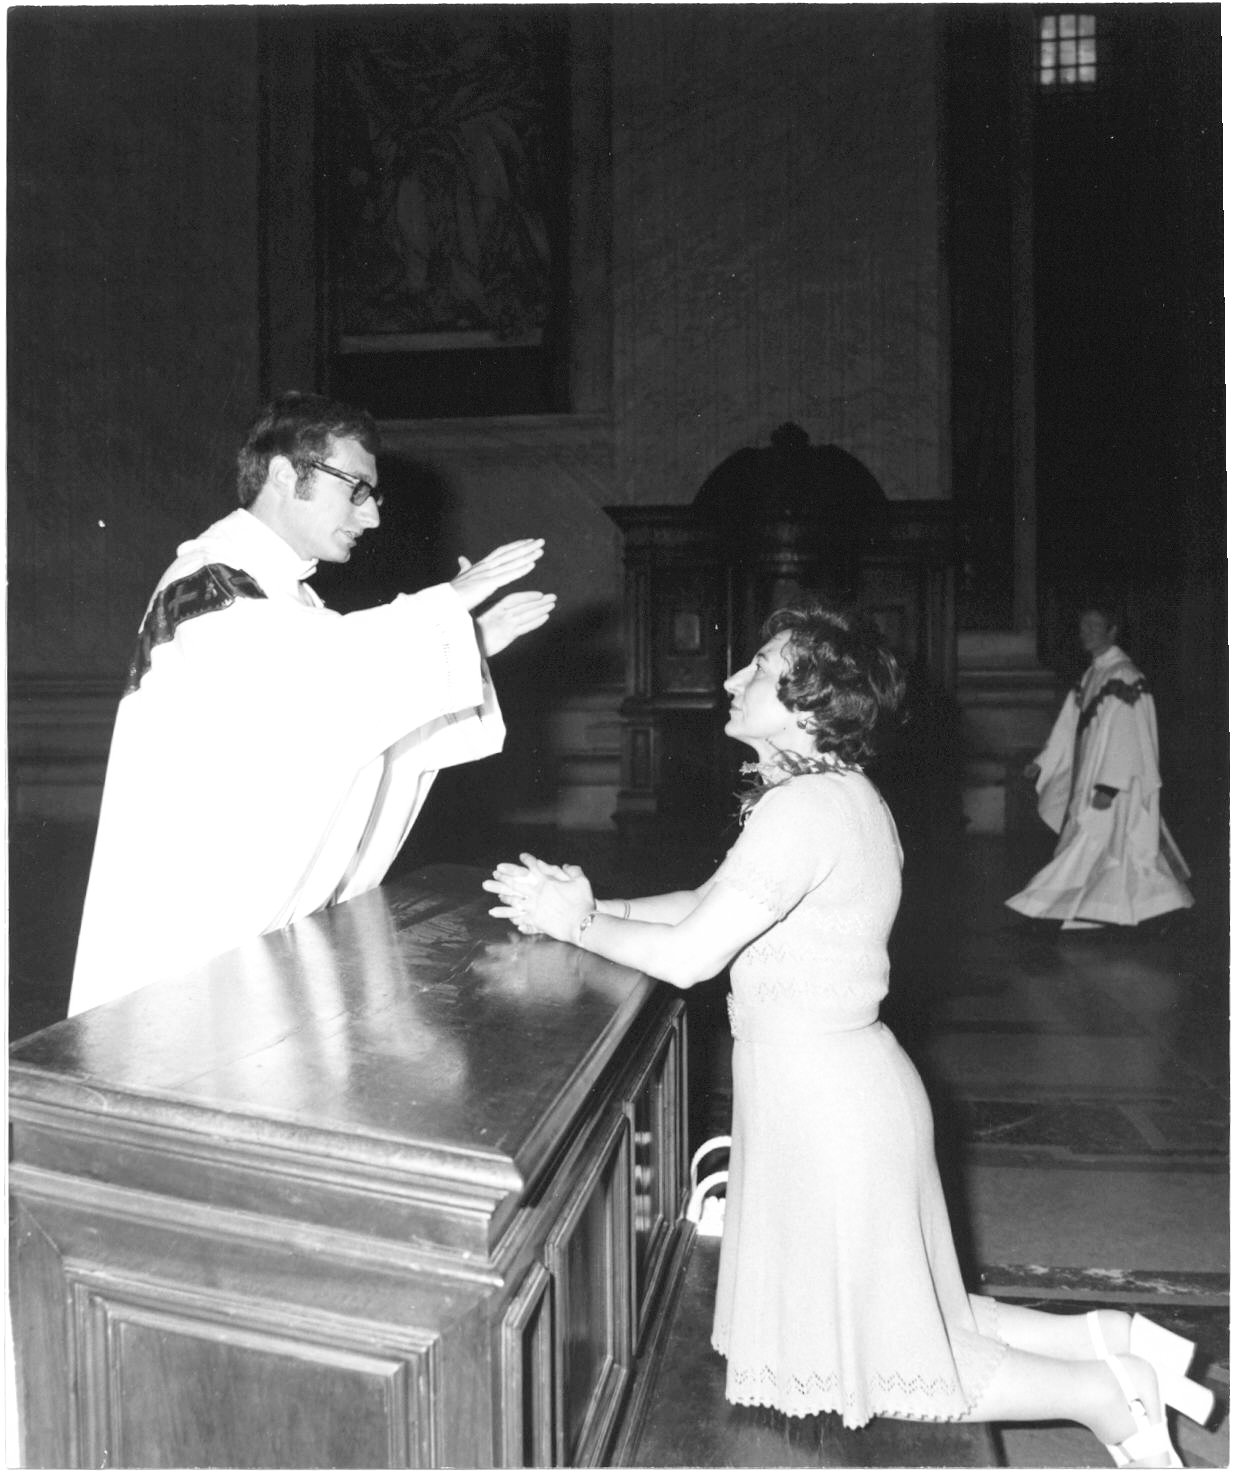 Lolita Evans receives a blessing from her son, then-Father Robert C. Evans, at St. Peter’s Basilica in Rome on July 3, 1973, the day after he was ordained a priest. Center,